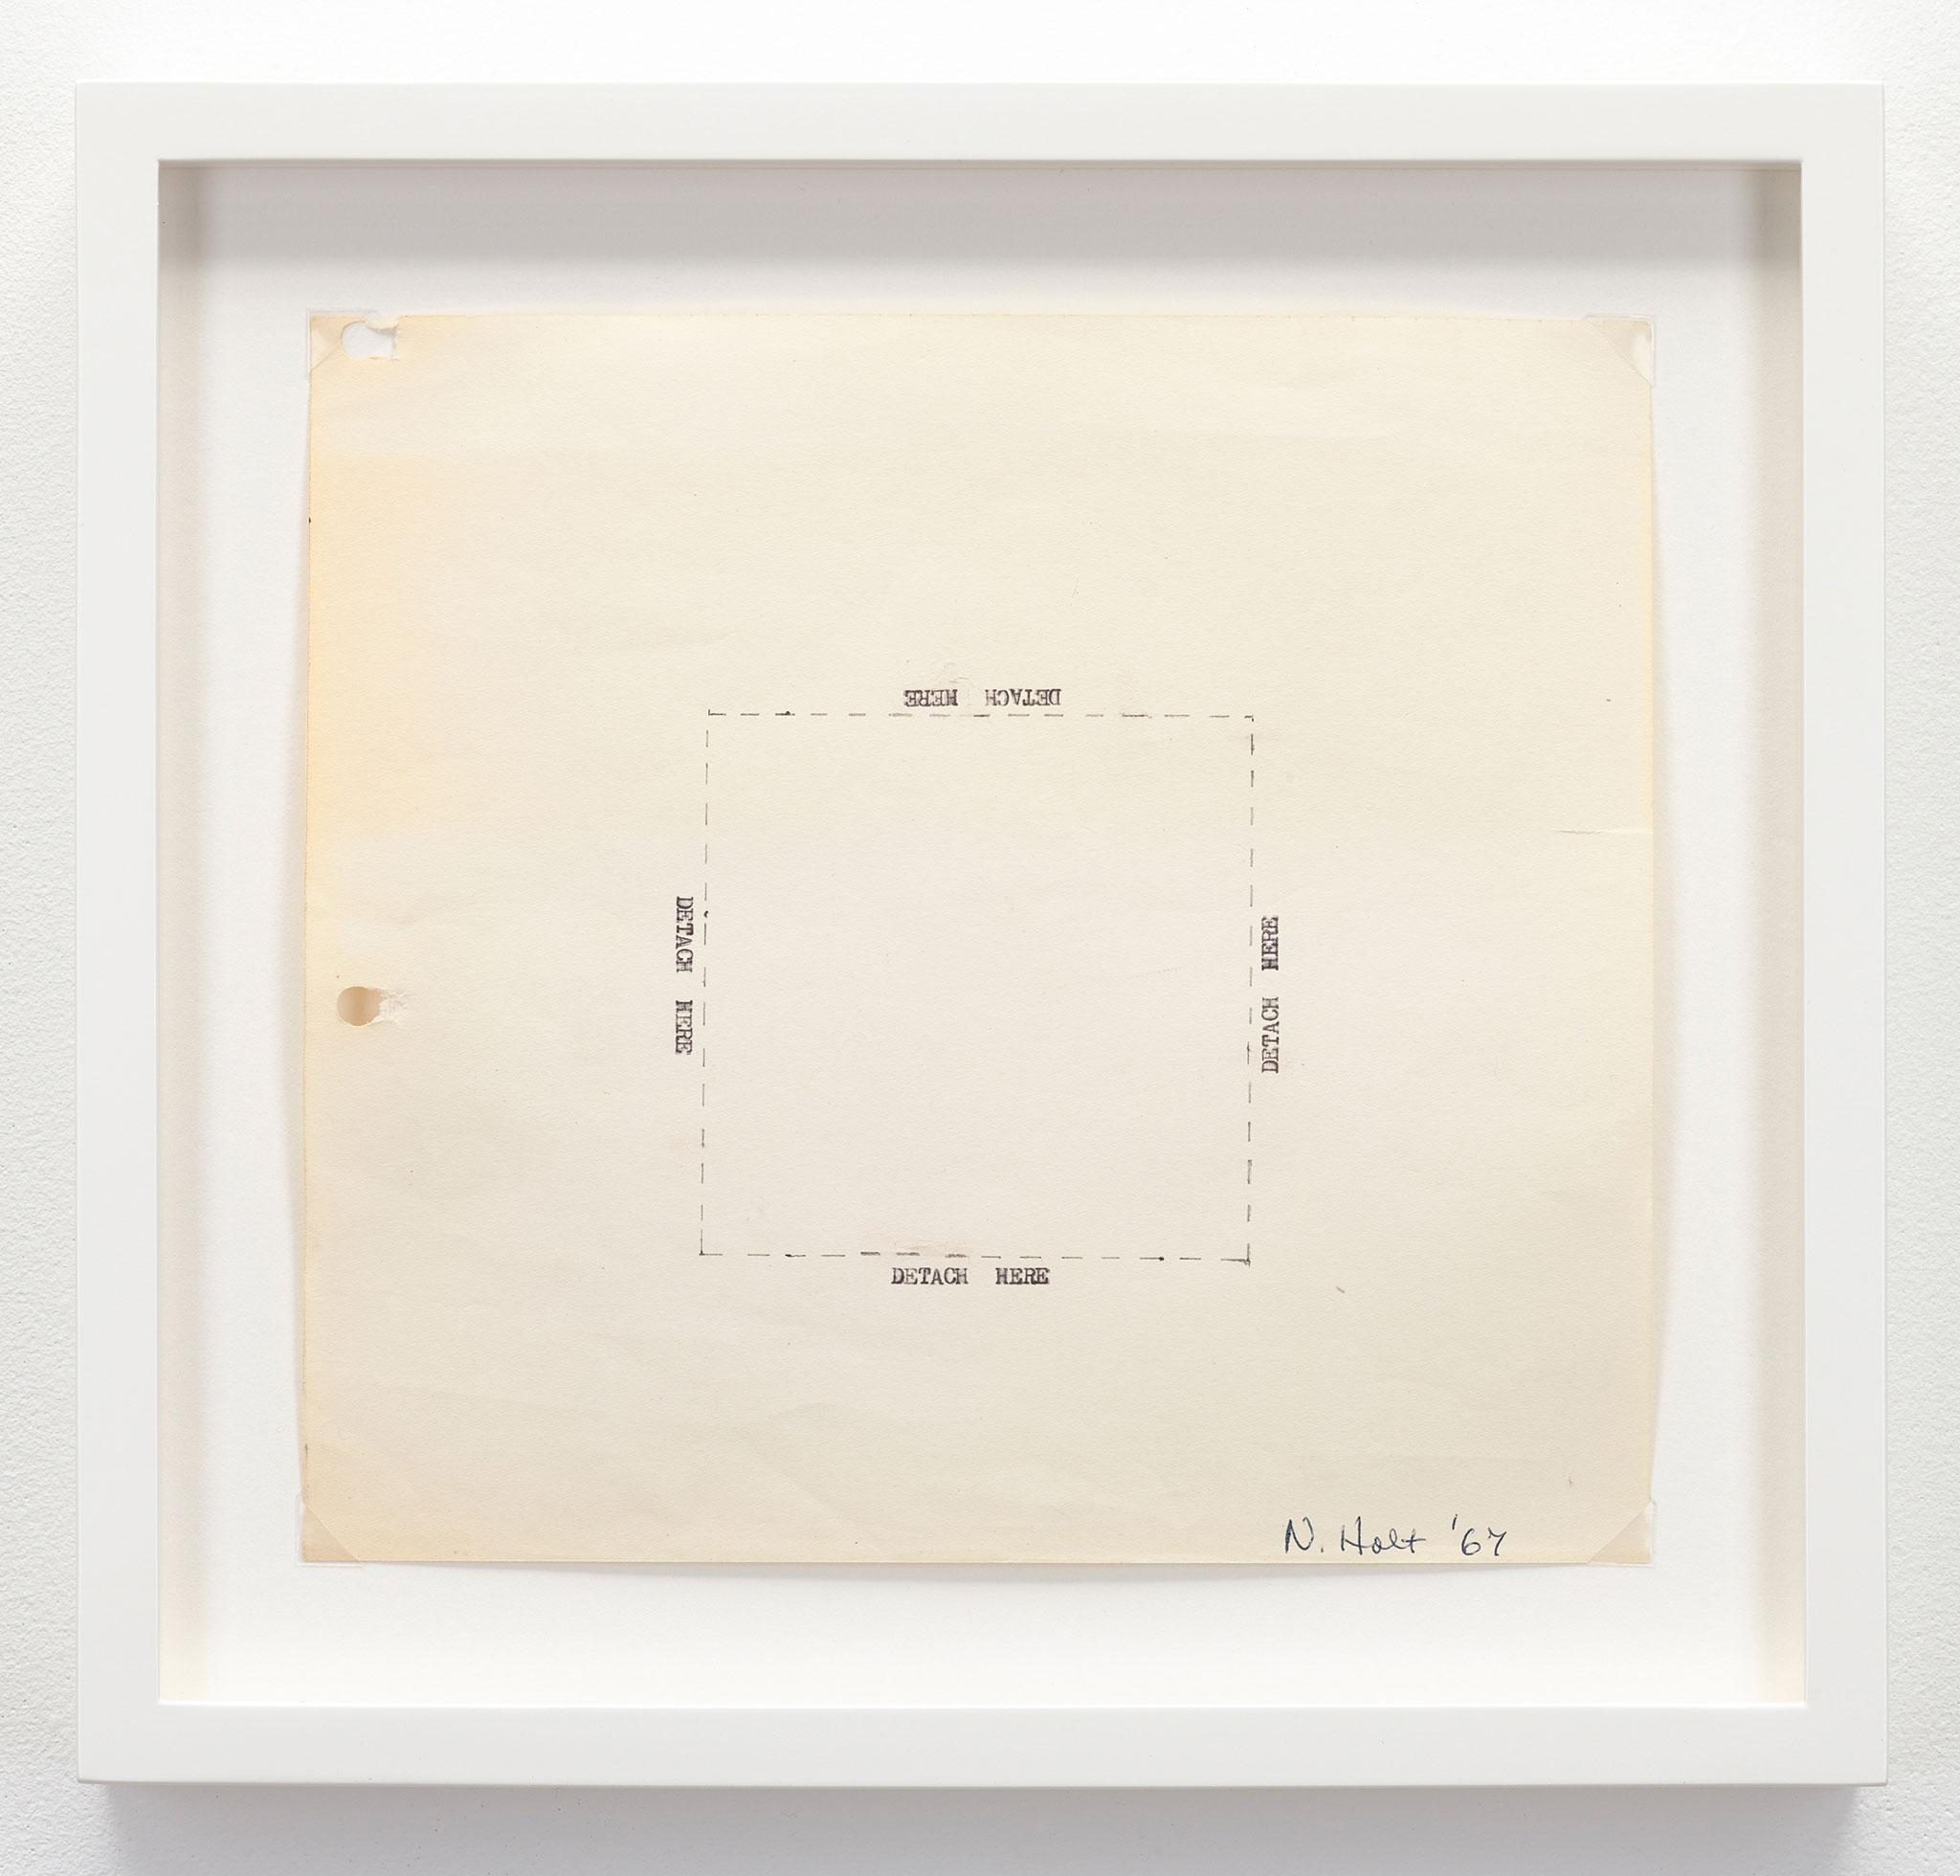 framed square piece of paper with the words "detach here" typewritten on each side of a box drawn with dashed lines